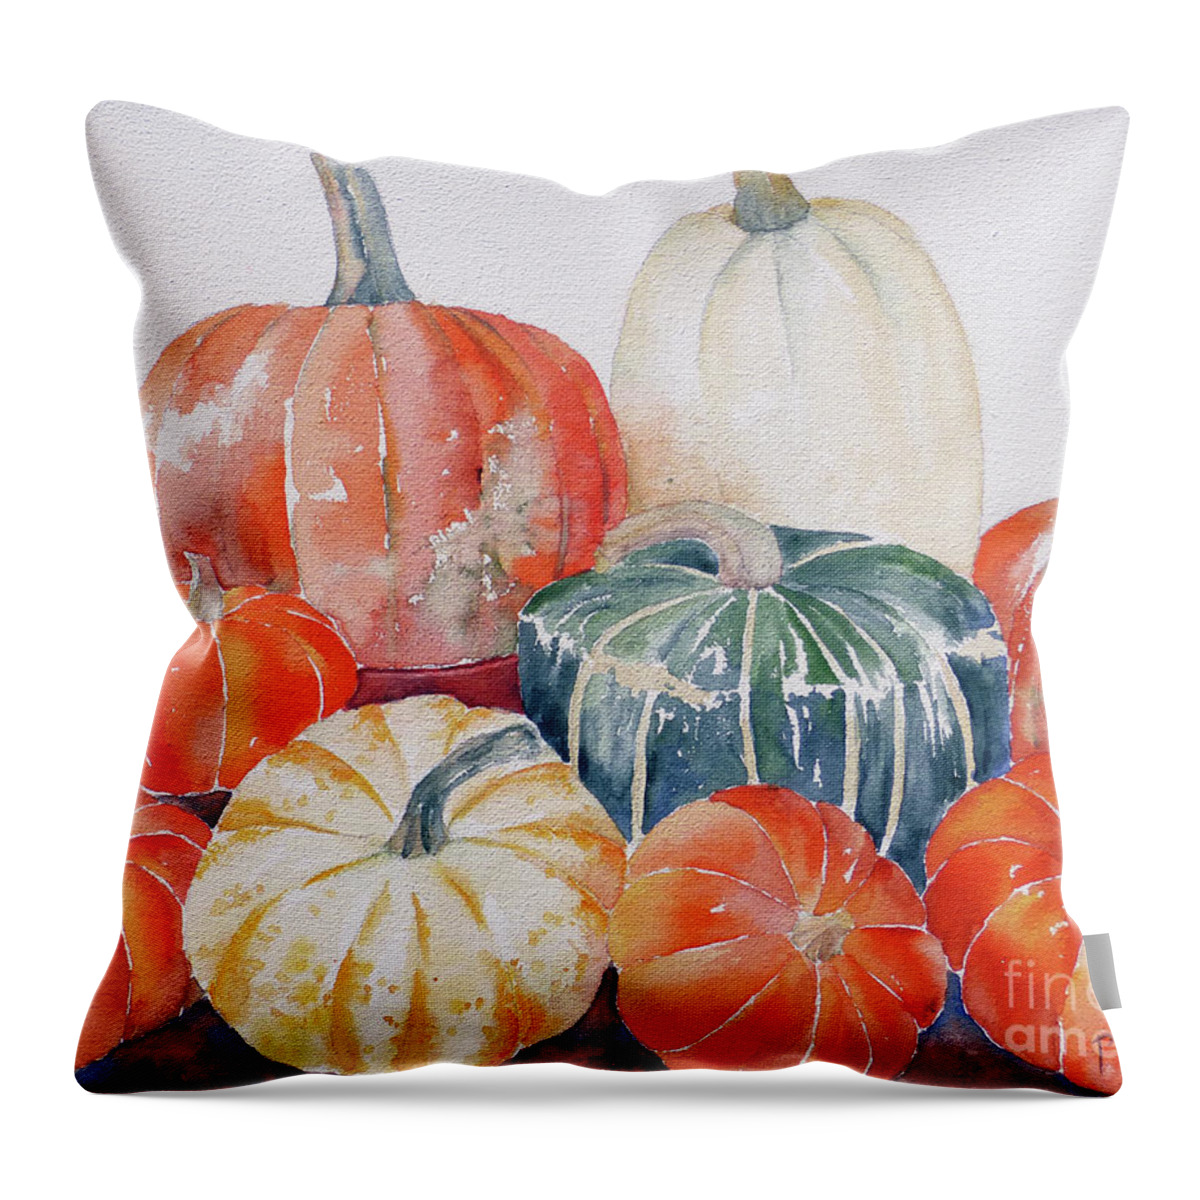 Realism Throw Pillow featuring the painting Pumpkins And Squash by Pat Katz